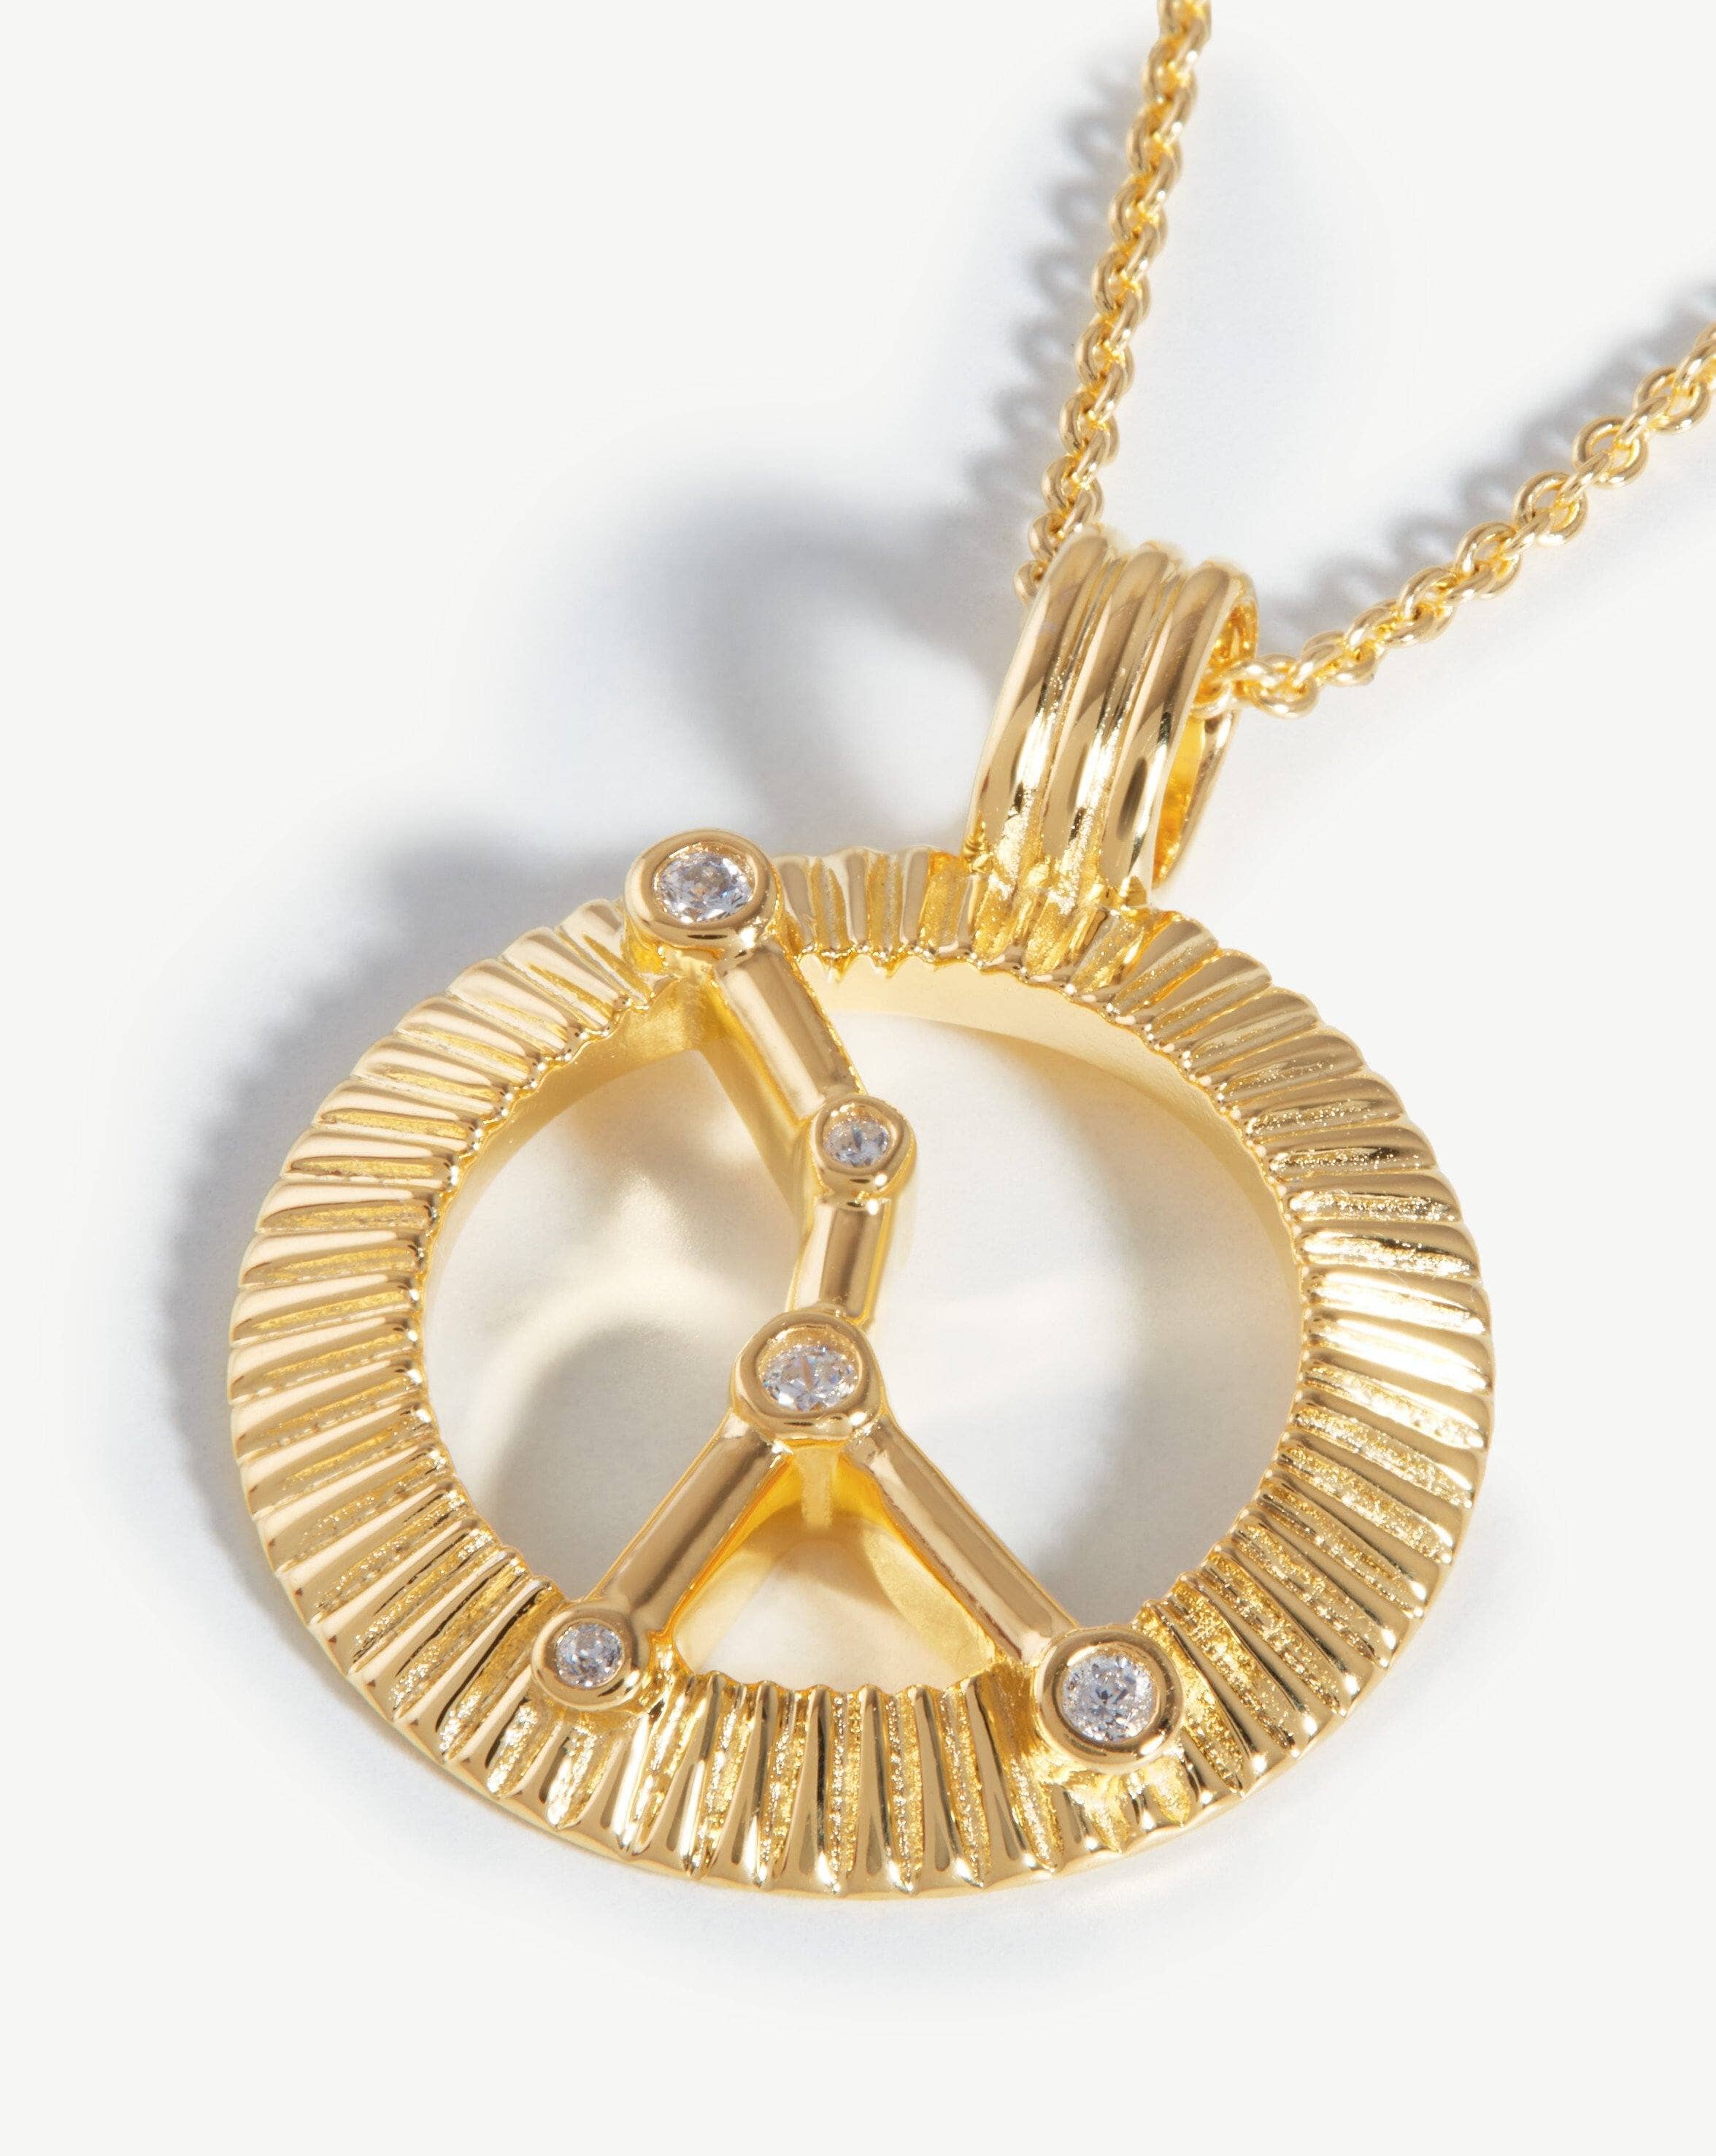 Zodiac Constellation Pendant Necklace - Cancer | 18ct Gold Plated Vermeil/Cancer Necklaces Missoma 